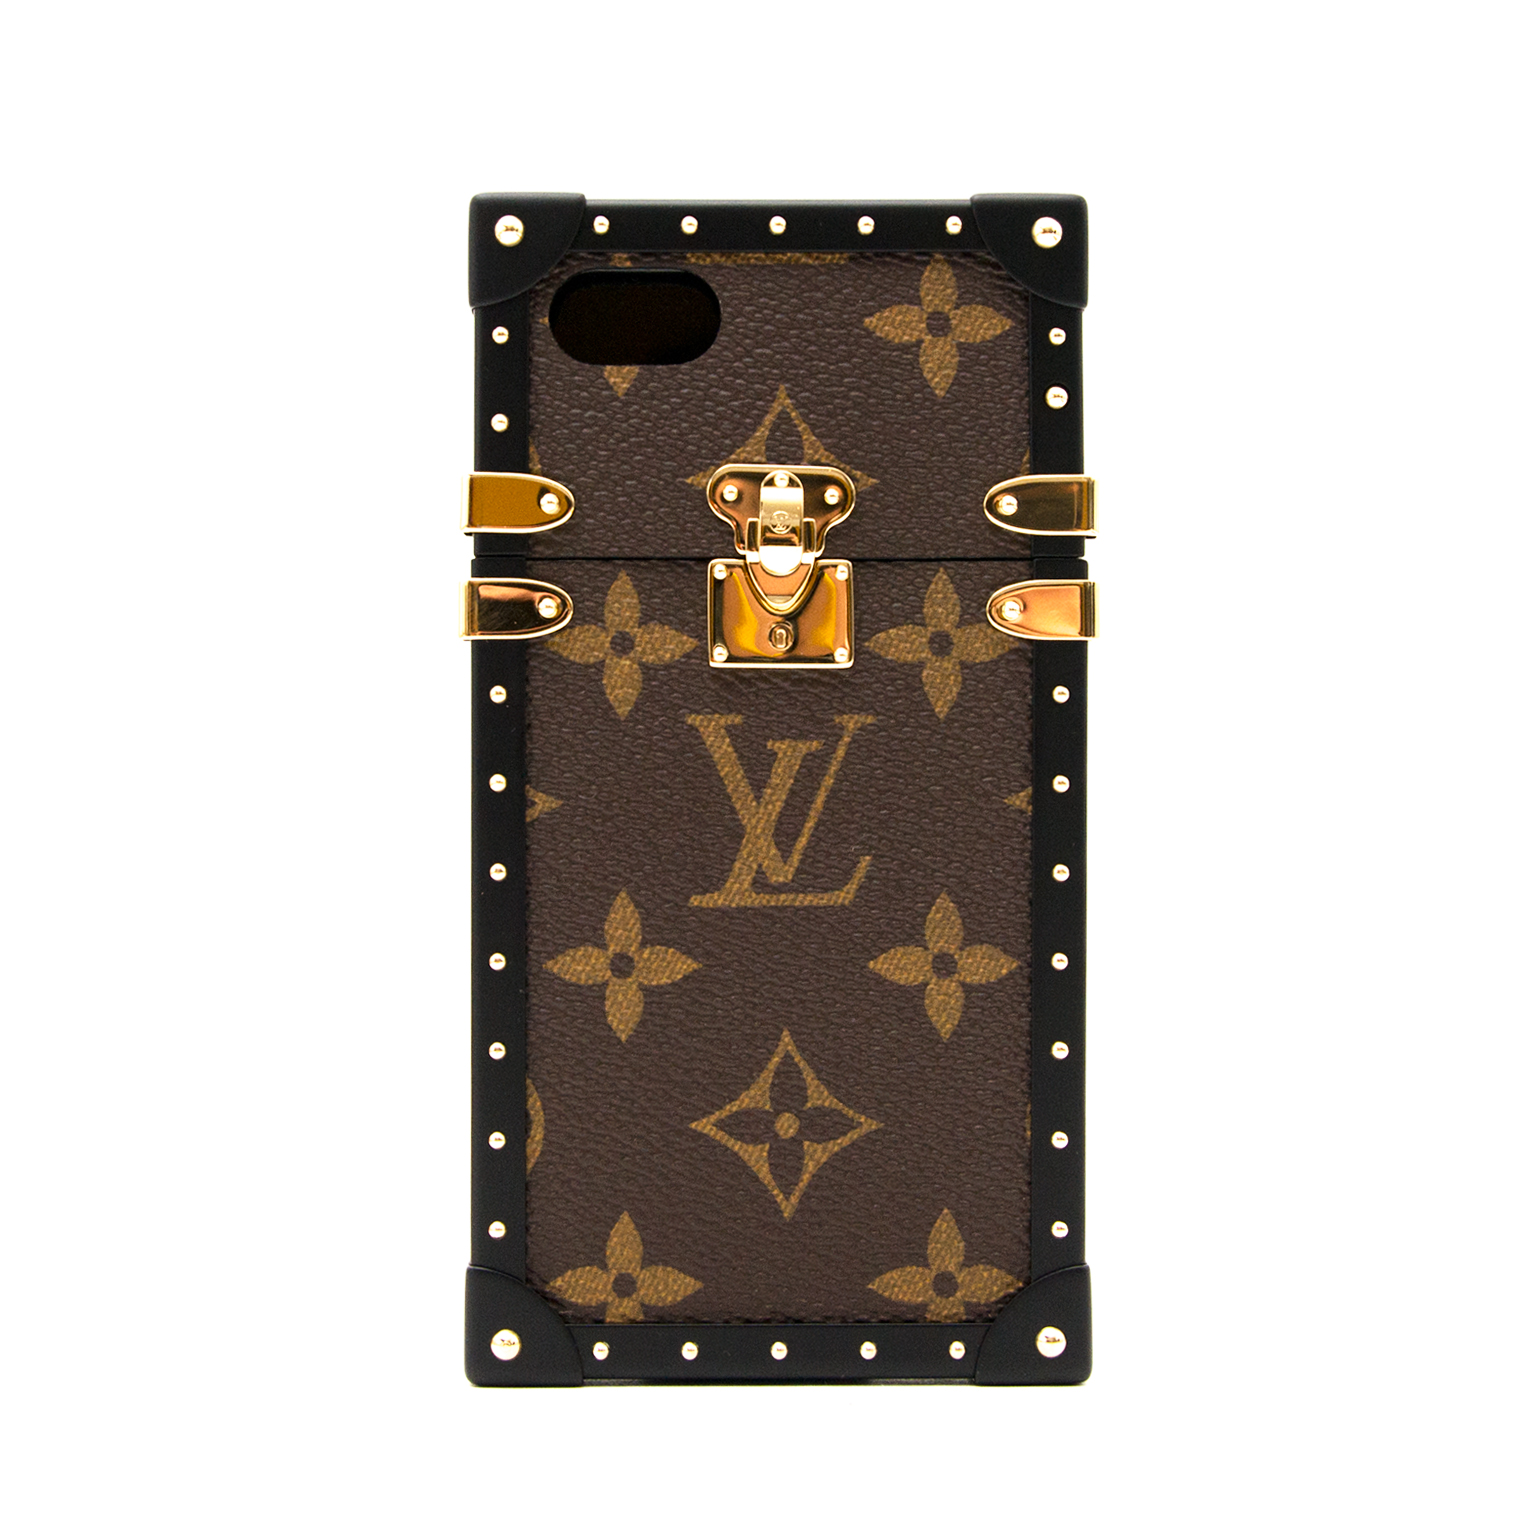 Fashion house Louis Vuitton launches luggage-inspired iPhone 7 cases for a  cool $1,180 to $5,500